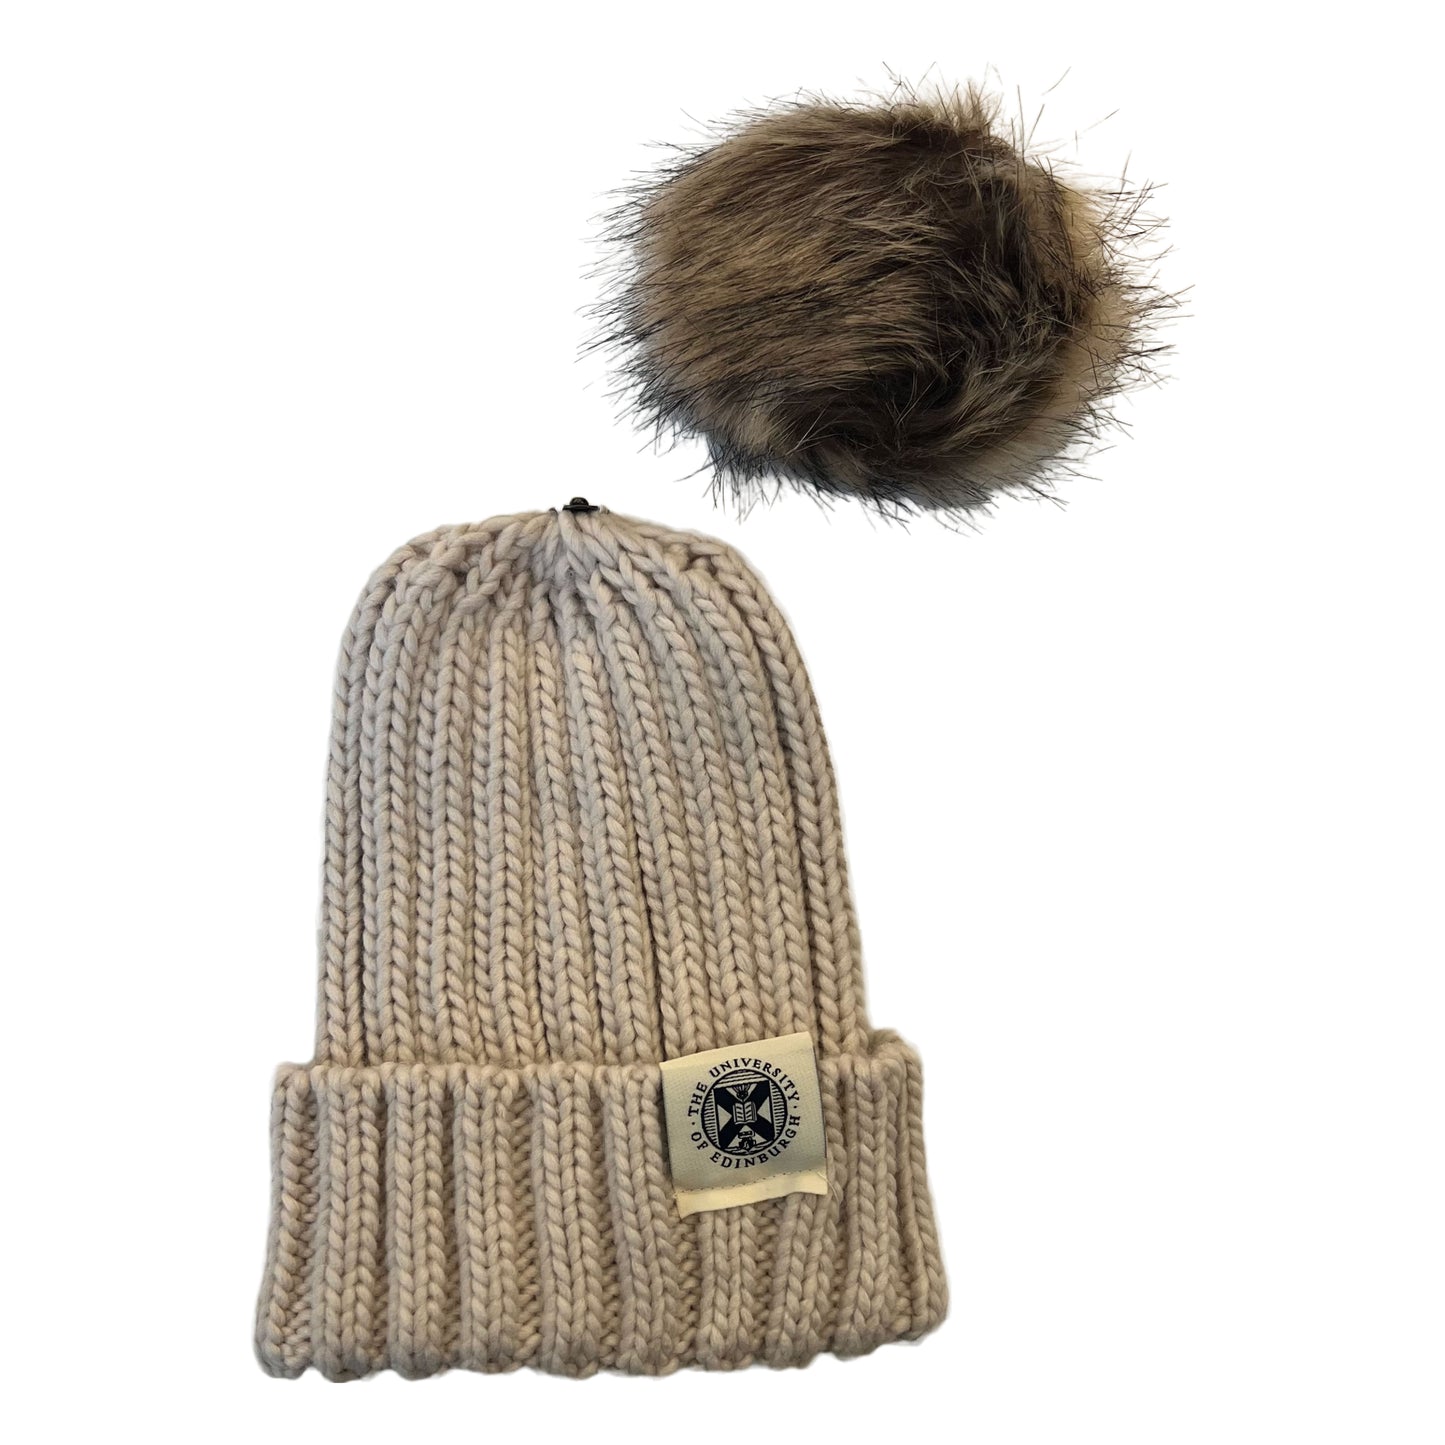 oatmeal beanie with detached brown pom pom and woven tag featuring university crest in navy